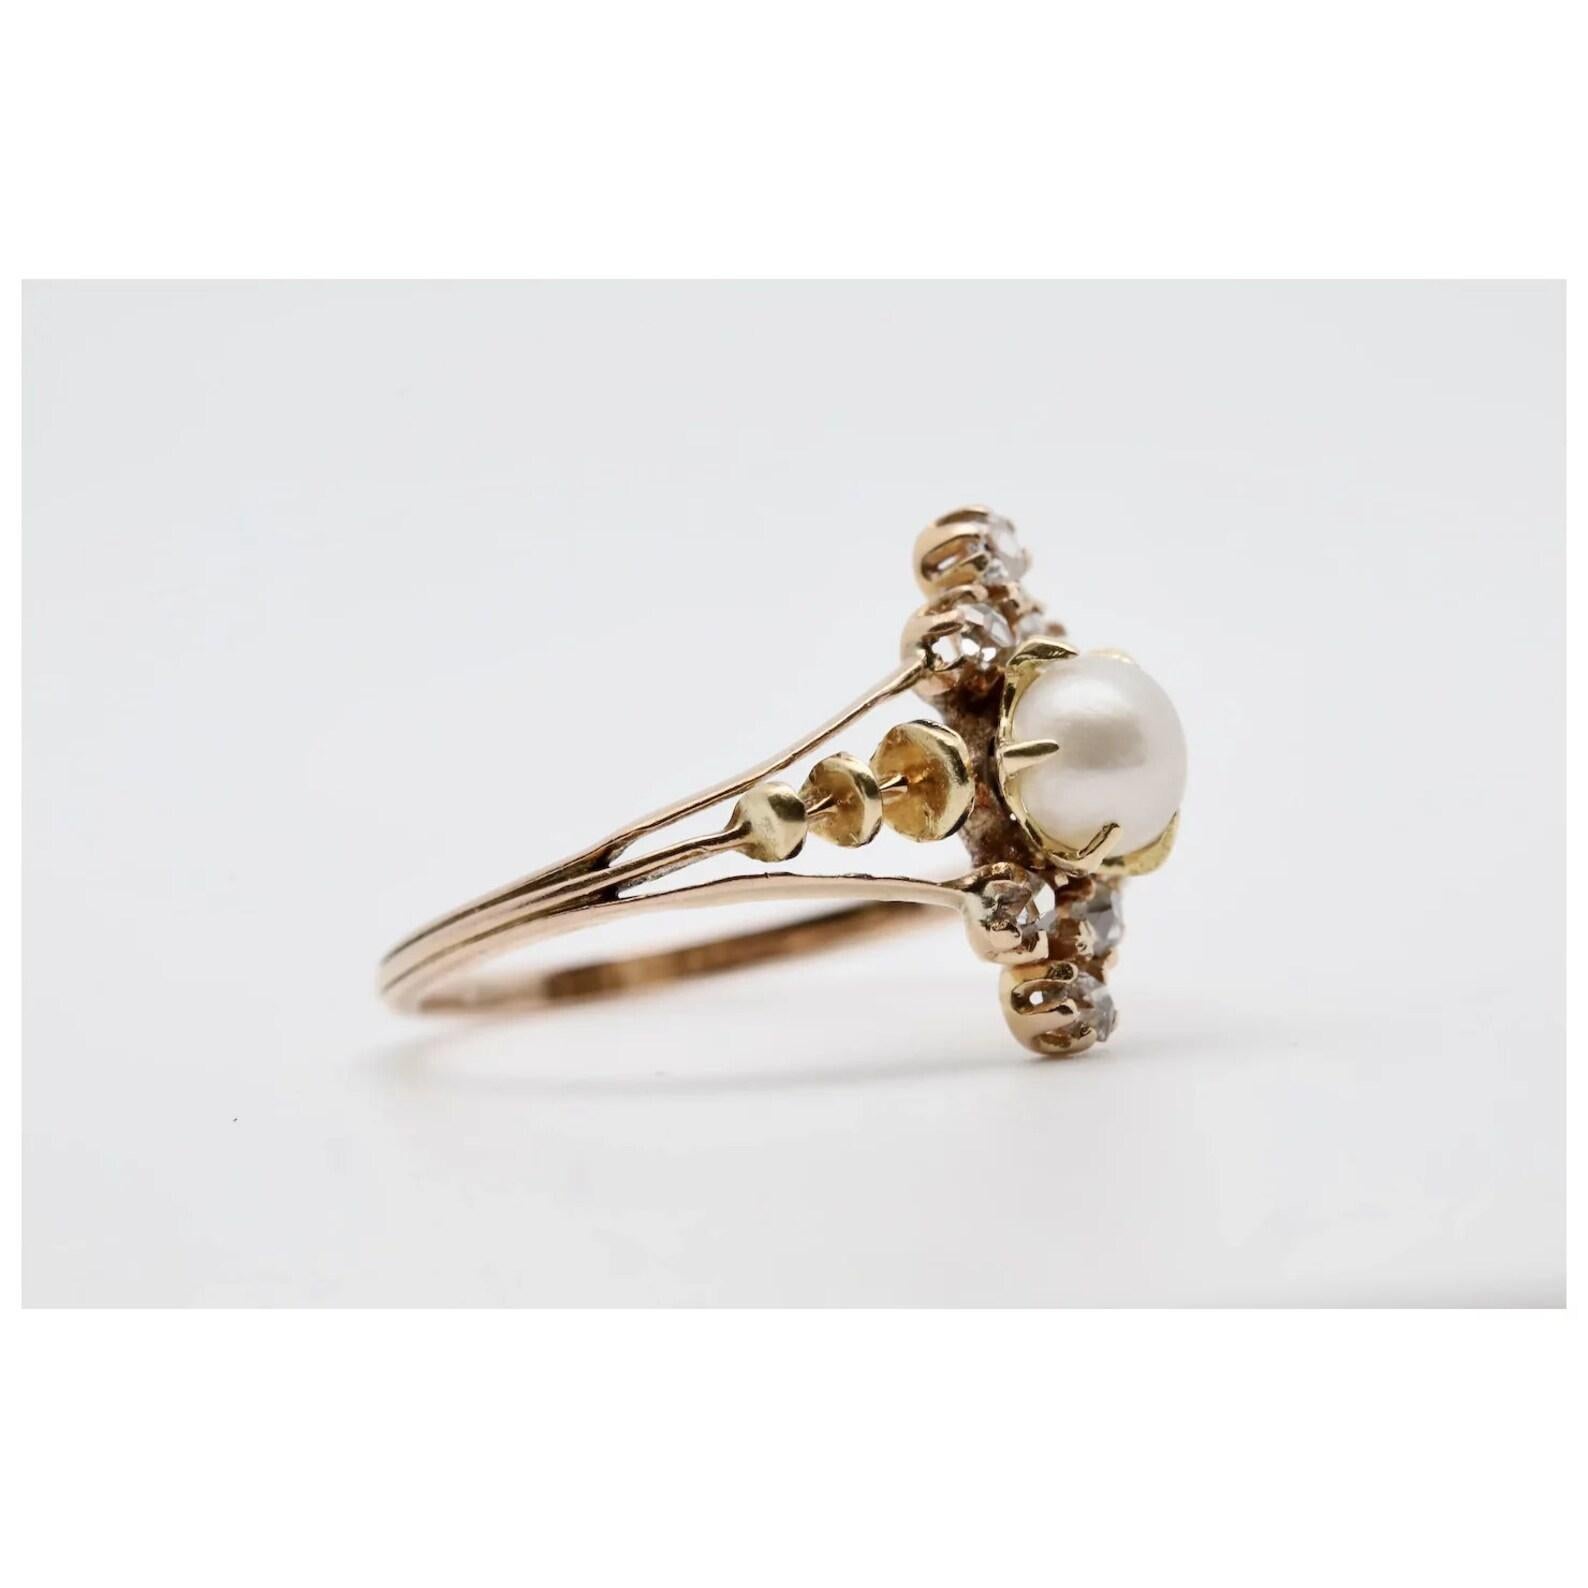 An original victorian period natural pearl and old mine cut diamond ring in 18 karat yellow gold. Centered by a beautiful lustrous 5mm natural saltwater pearl. Framing the pearl are six sparkling old mine cut diamonds weighing a combined 0.18